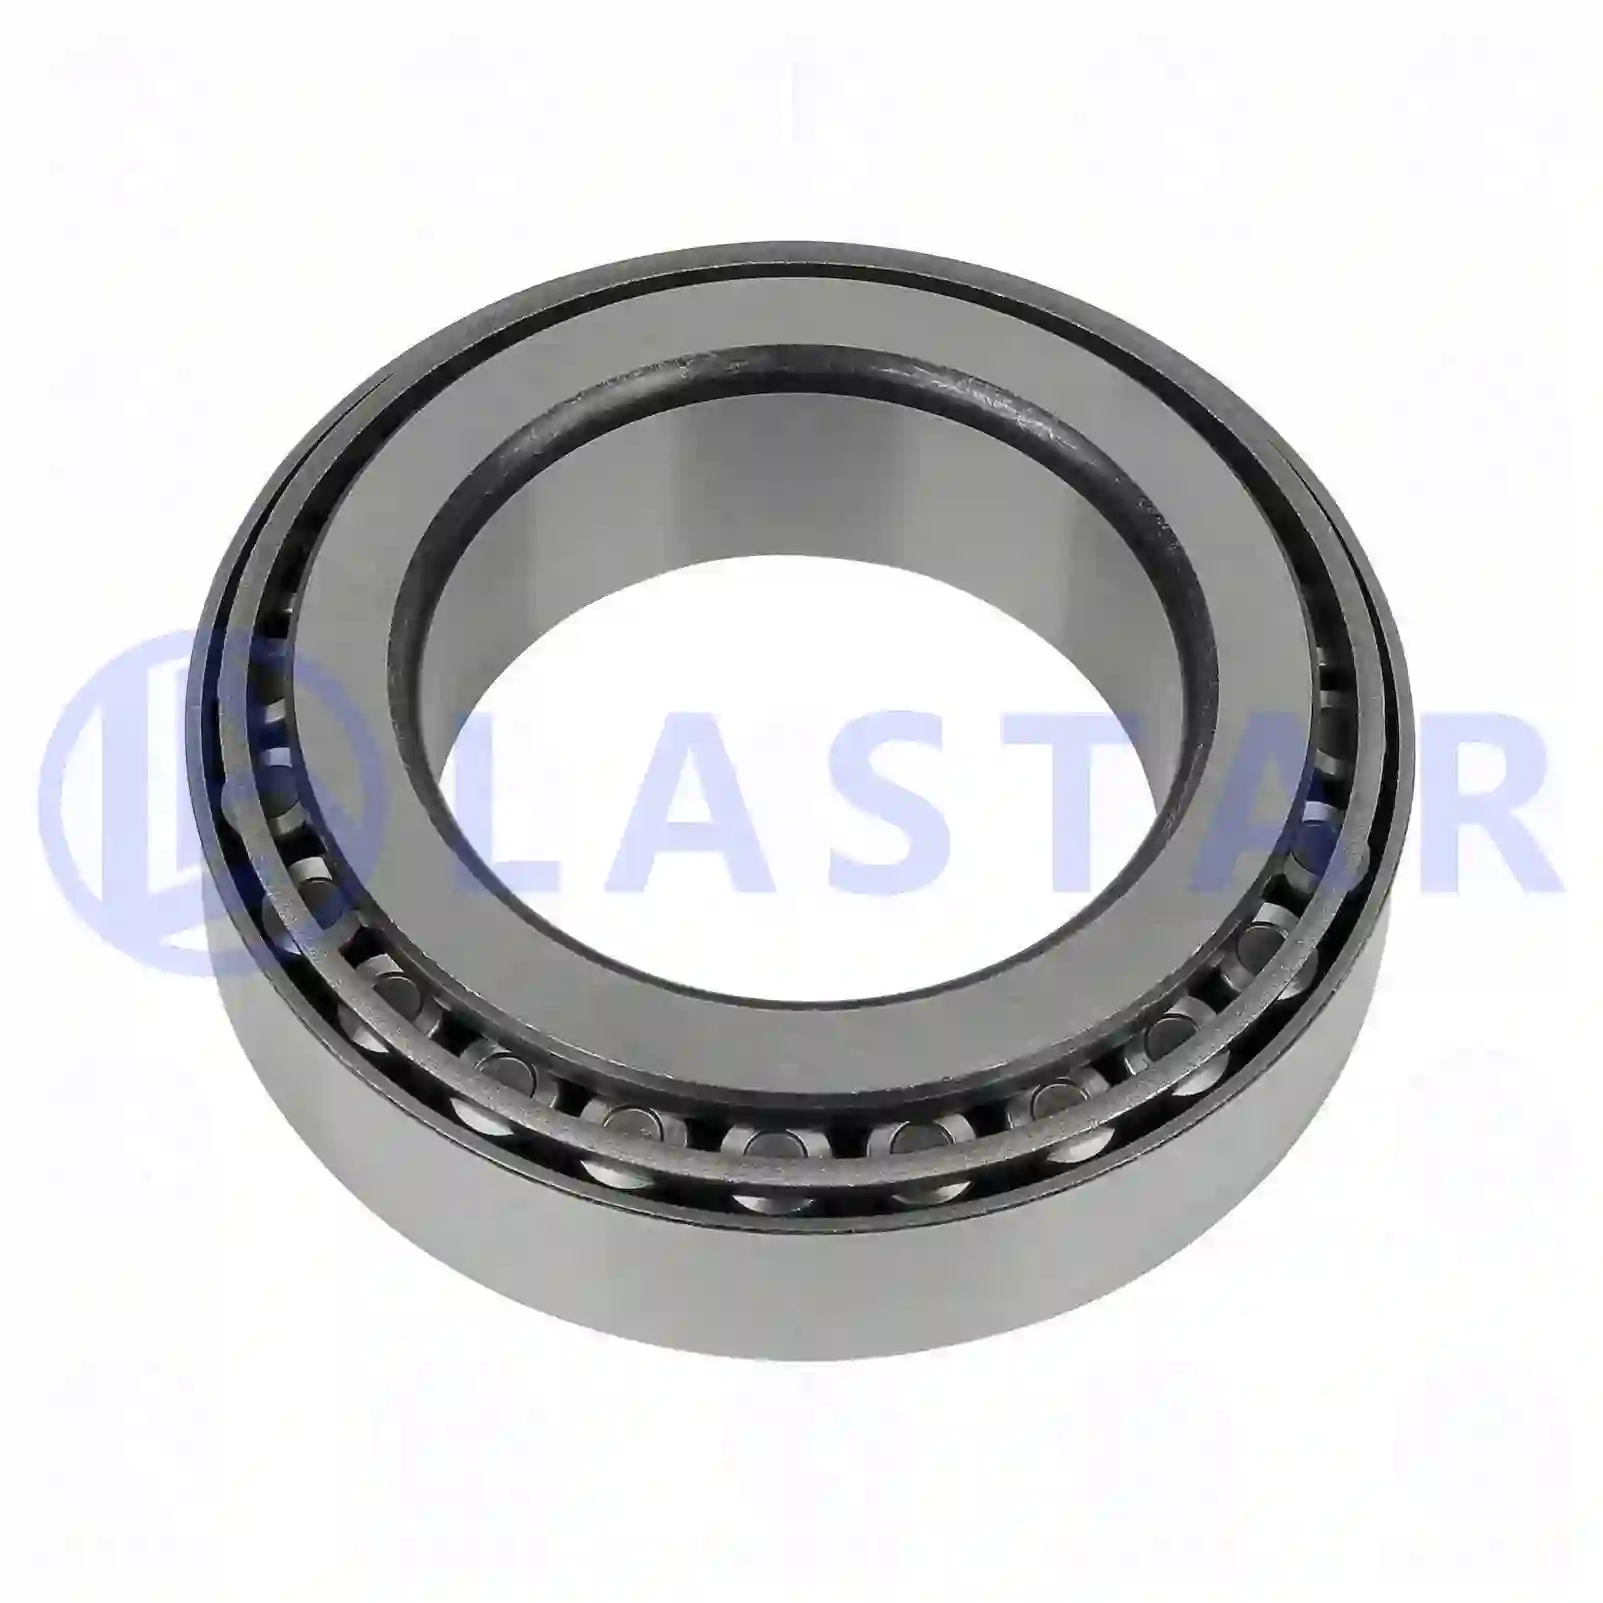 Hub Tapered roller bearing, la no: 77726525 ,  oem no:9433269, 988480104, 988480104A, 07160953, 7160953, 4200005100, 6015000D, T6015000D000, 184112 Lastar Spare Part | Truck Spare Parts, Auotomotive Spare Parts